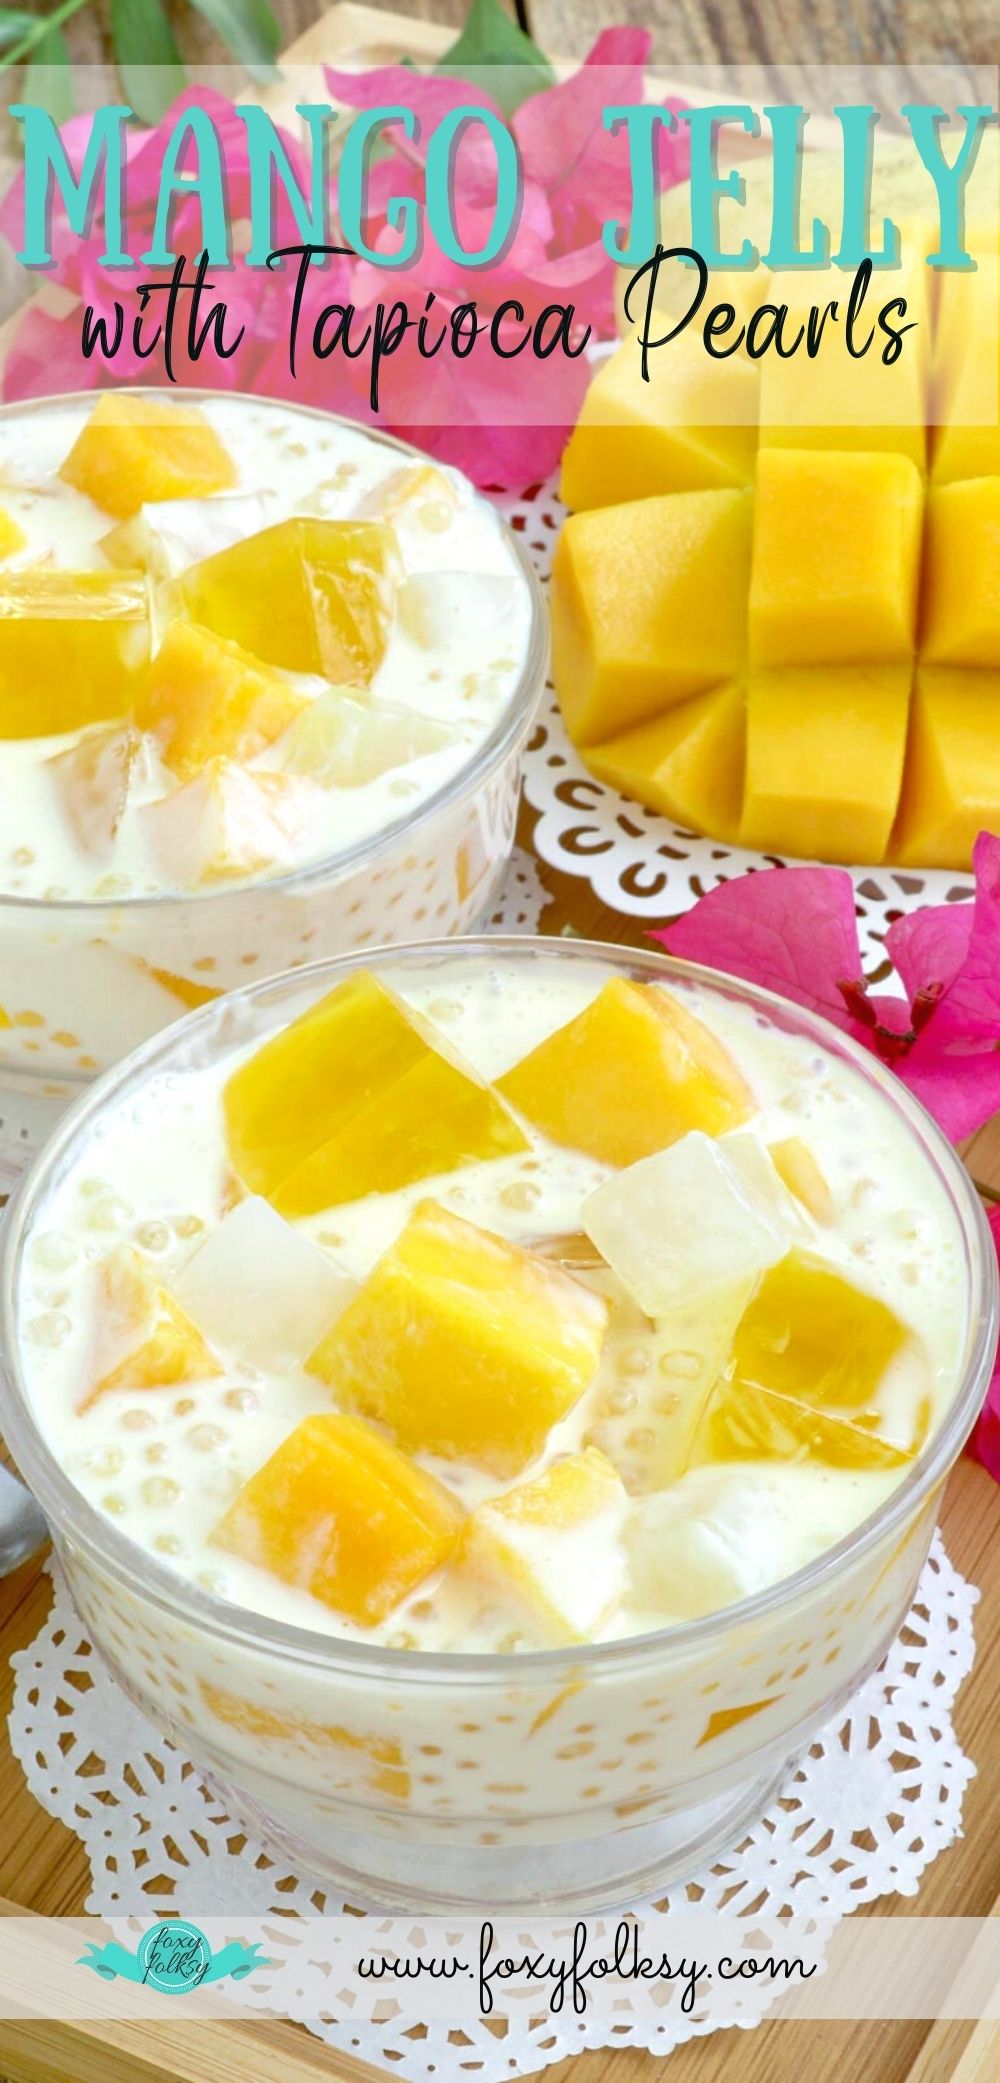 Sweet, refreshing and creamy Mango Jelly in dessert bowls.